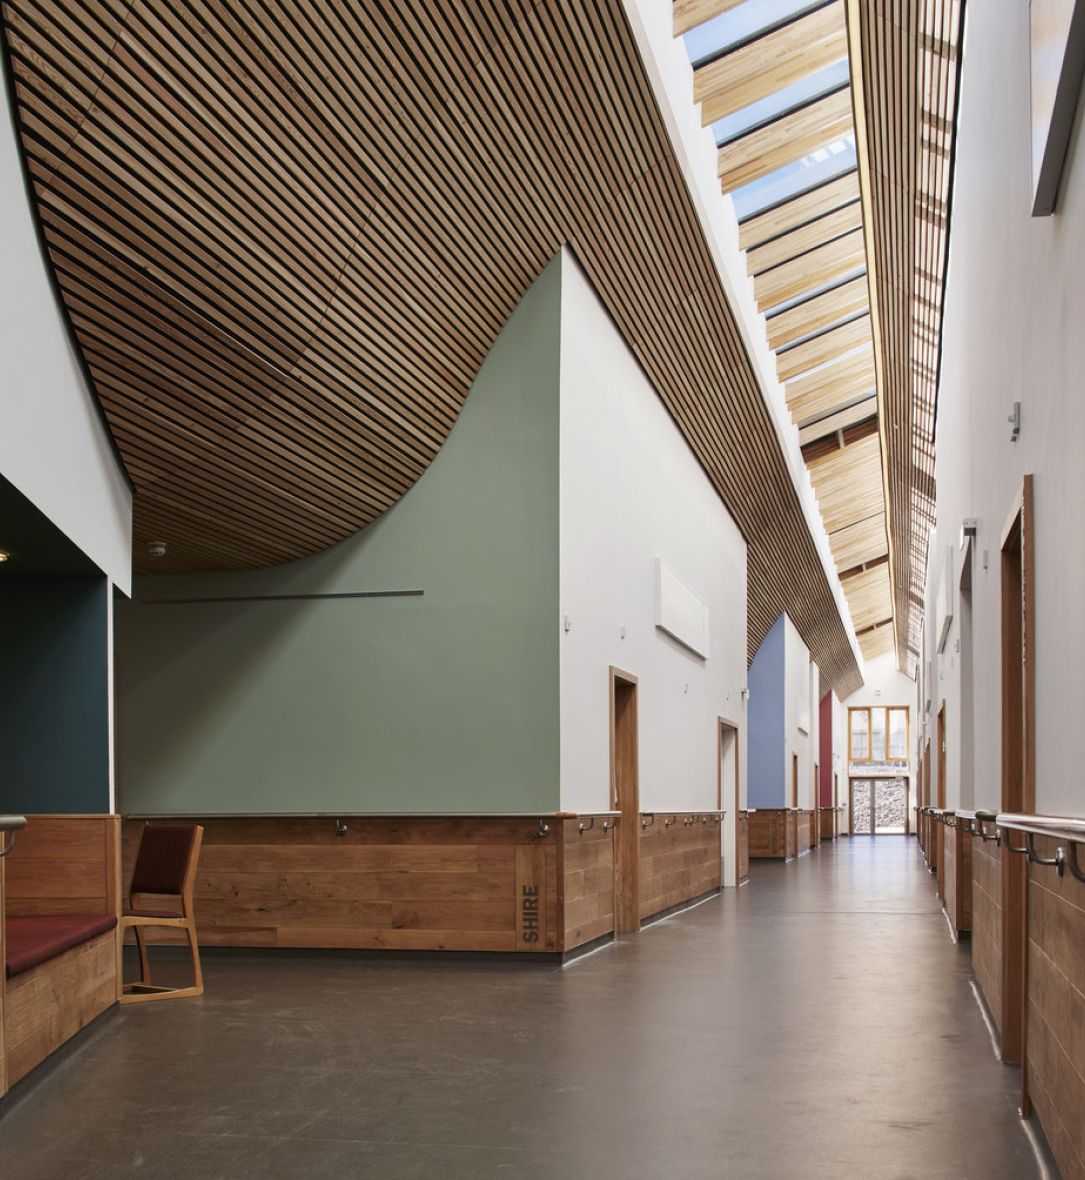 Timber Slatted Ceilings at St Michael's Hospice